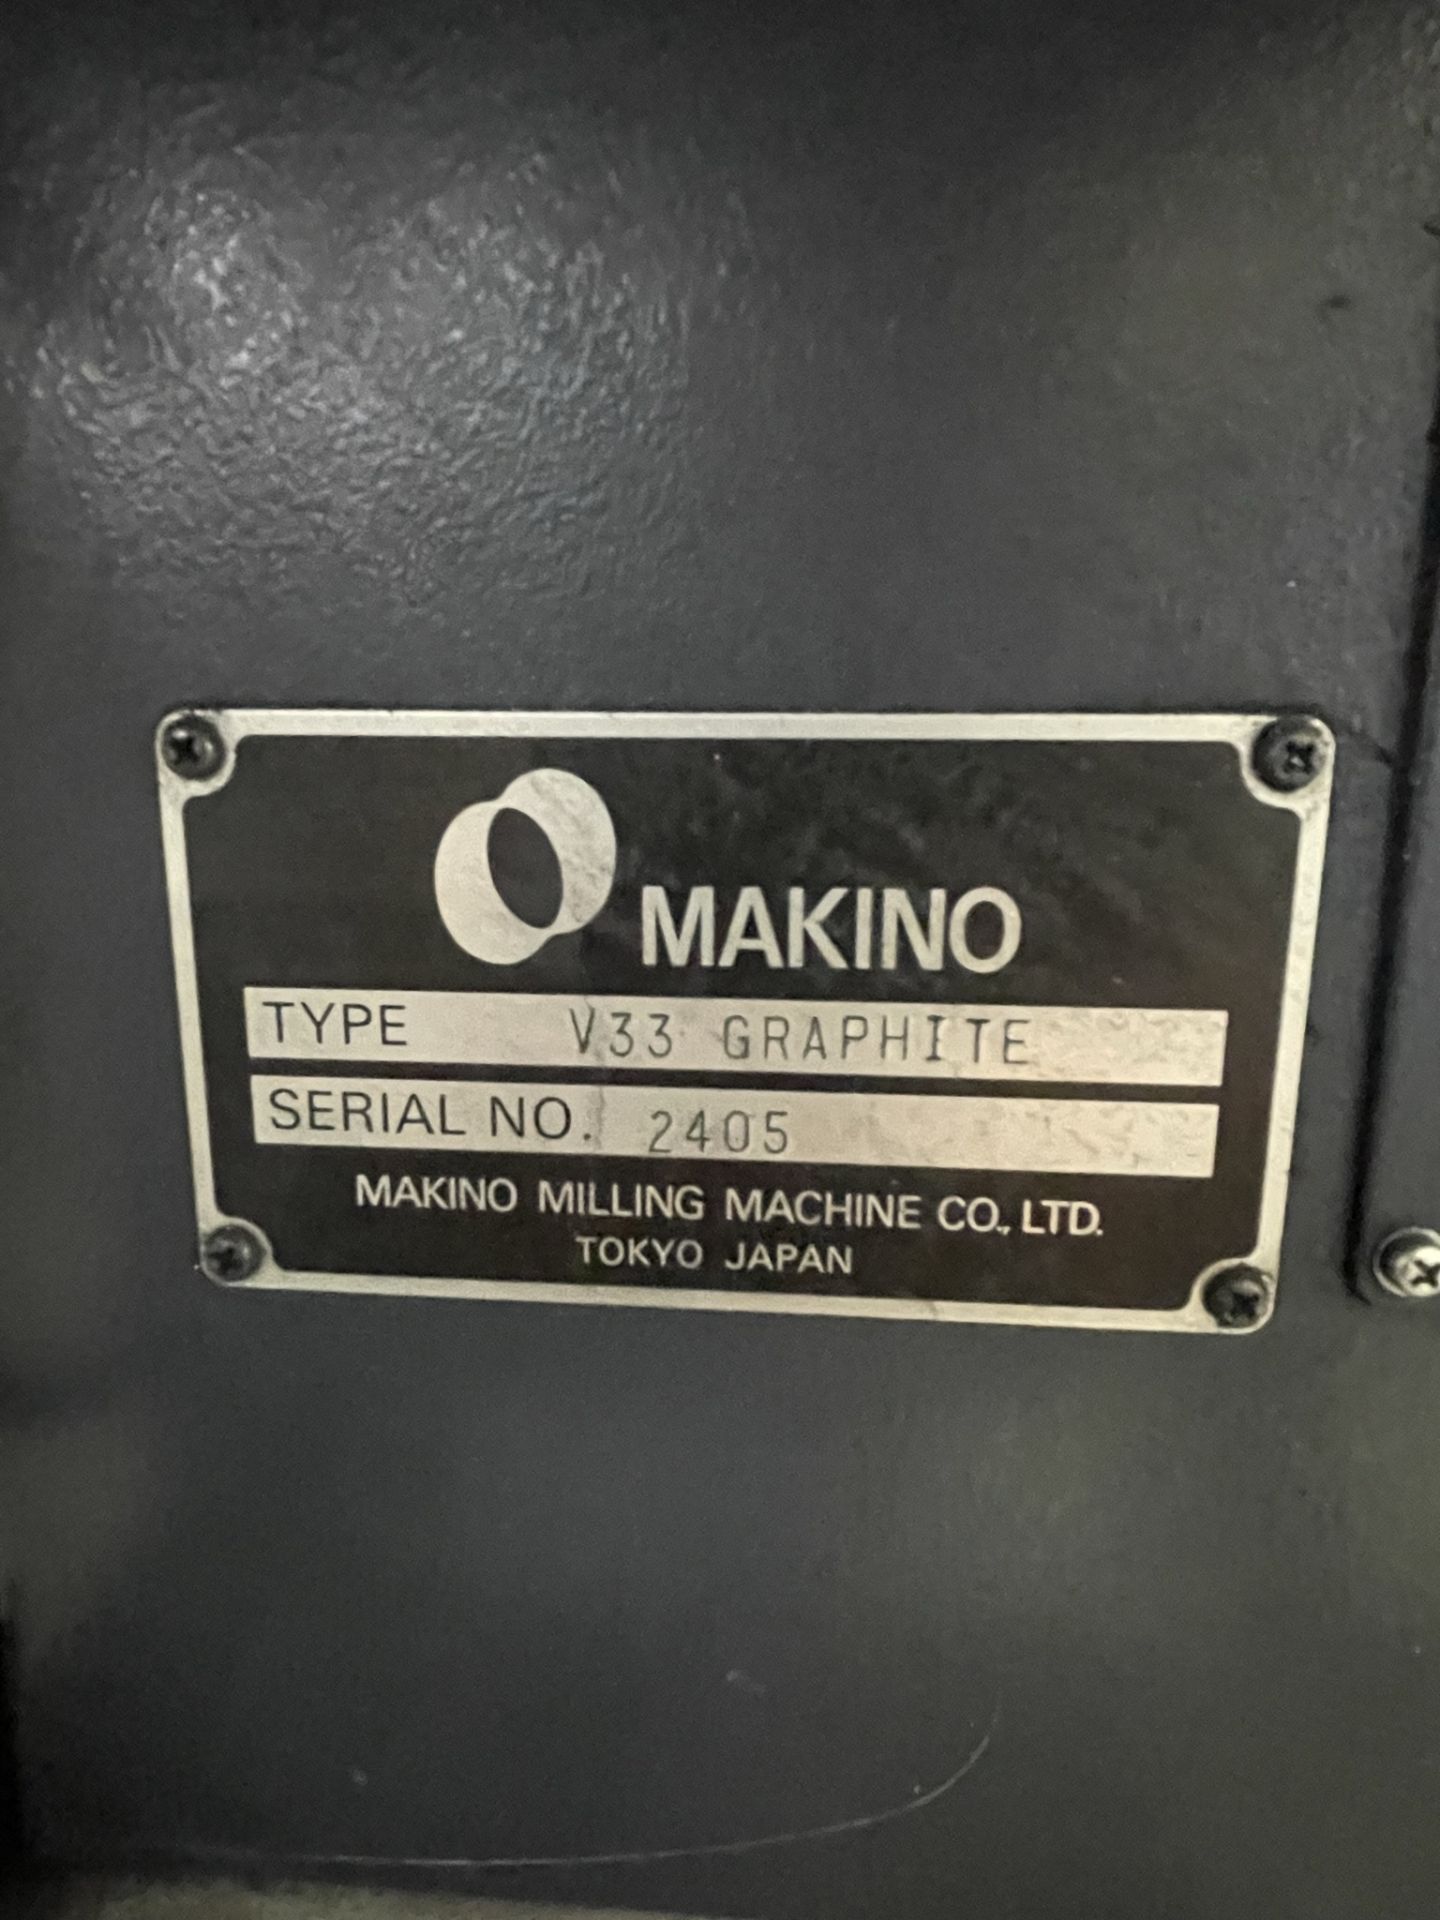 2000 Makino SNC64 Four Axis CNC Vertical Machining Center - Image 12 of 13